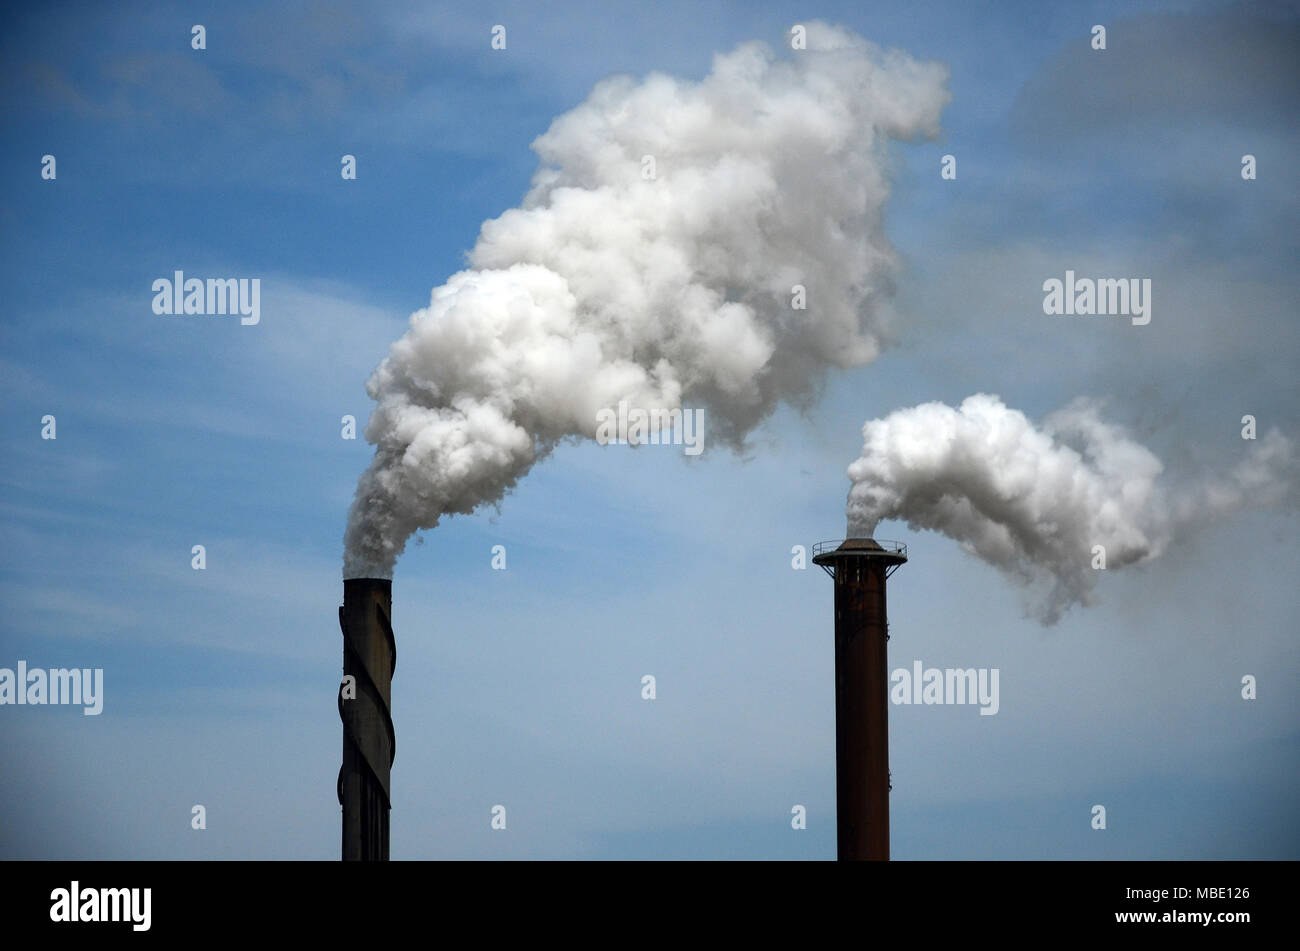 Industrial pollution,emission of toxic chemicals into the atmosphere Stock Photo